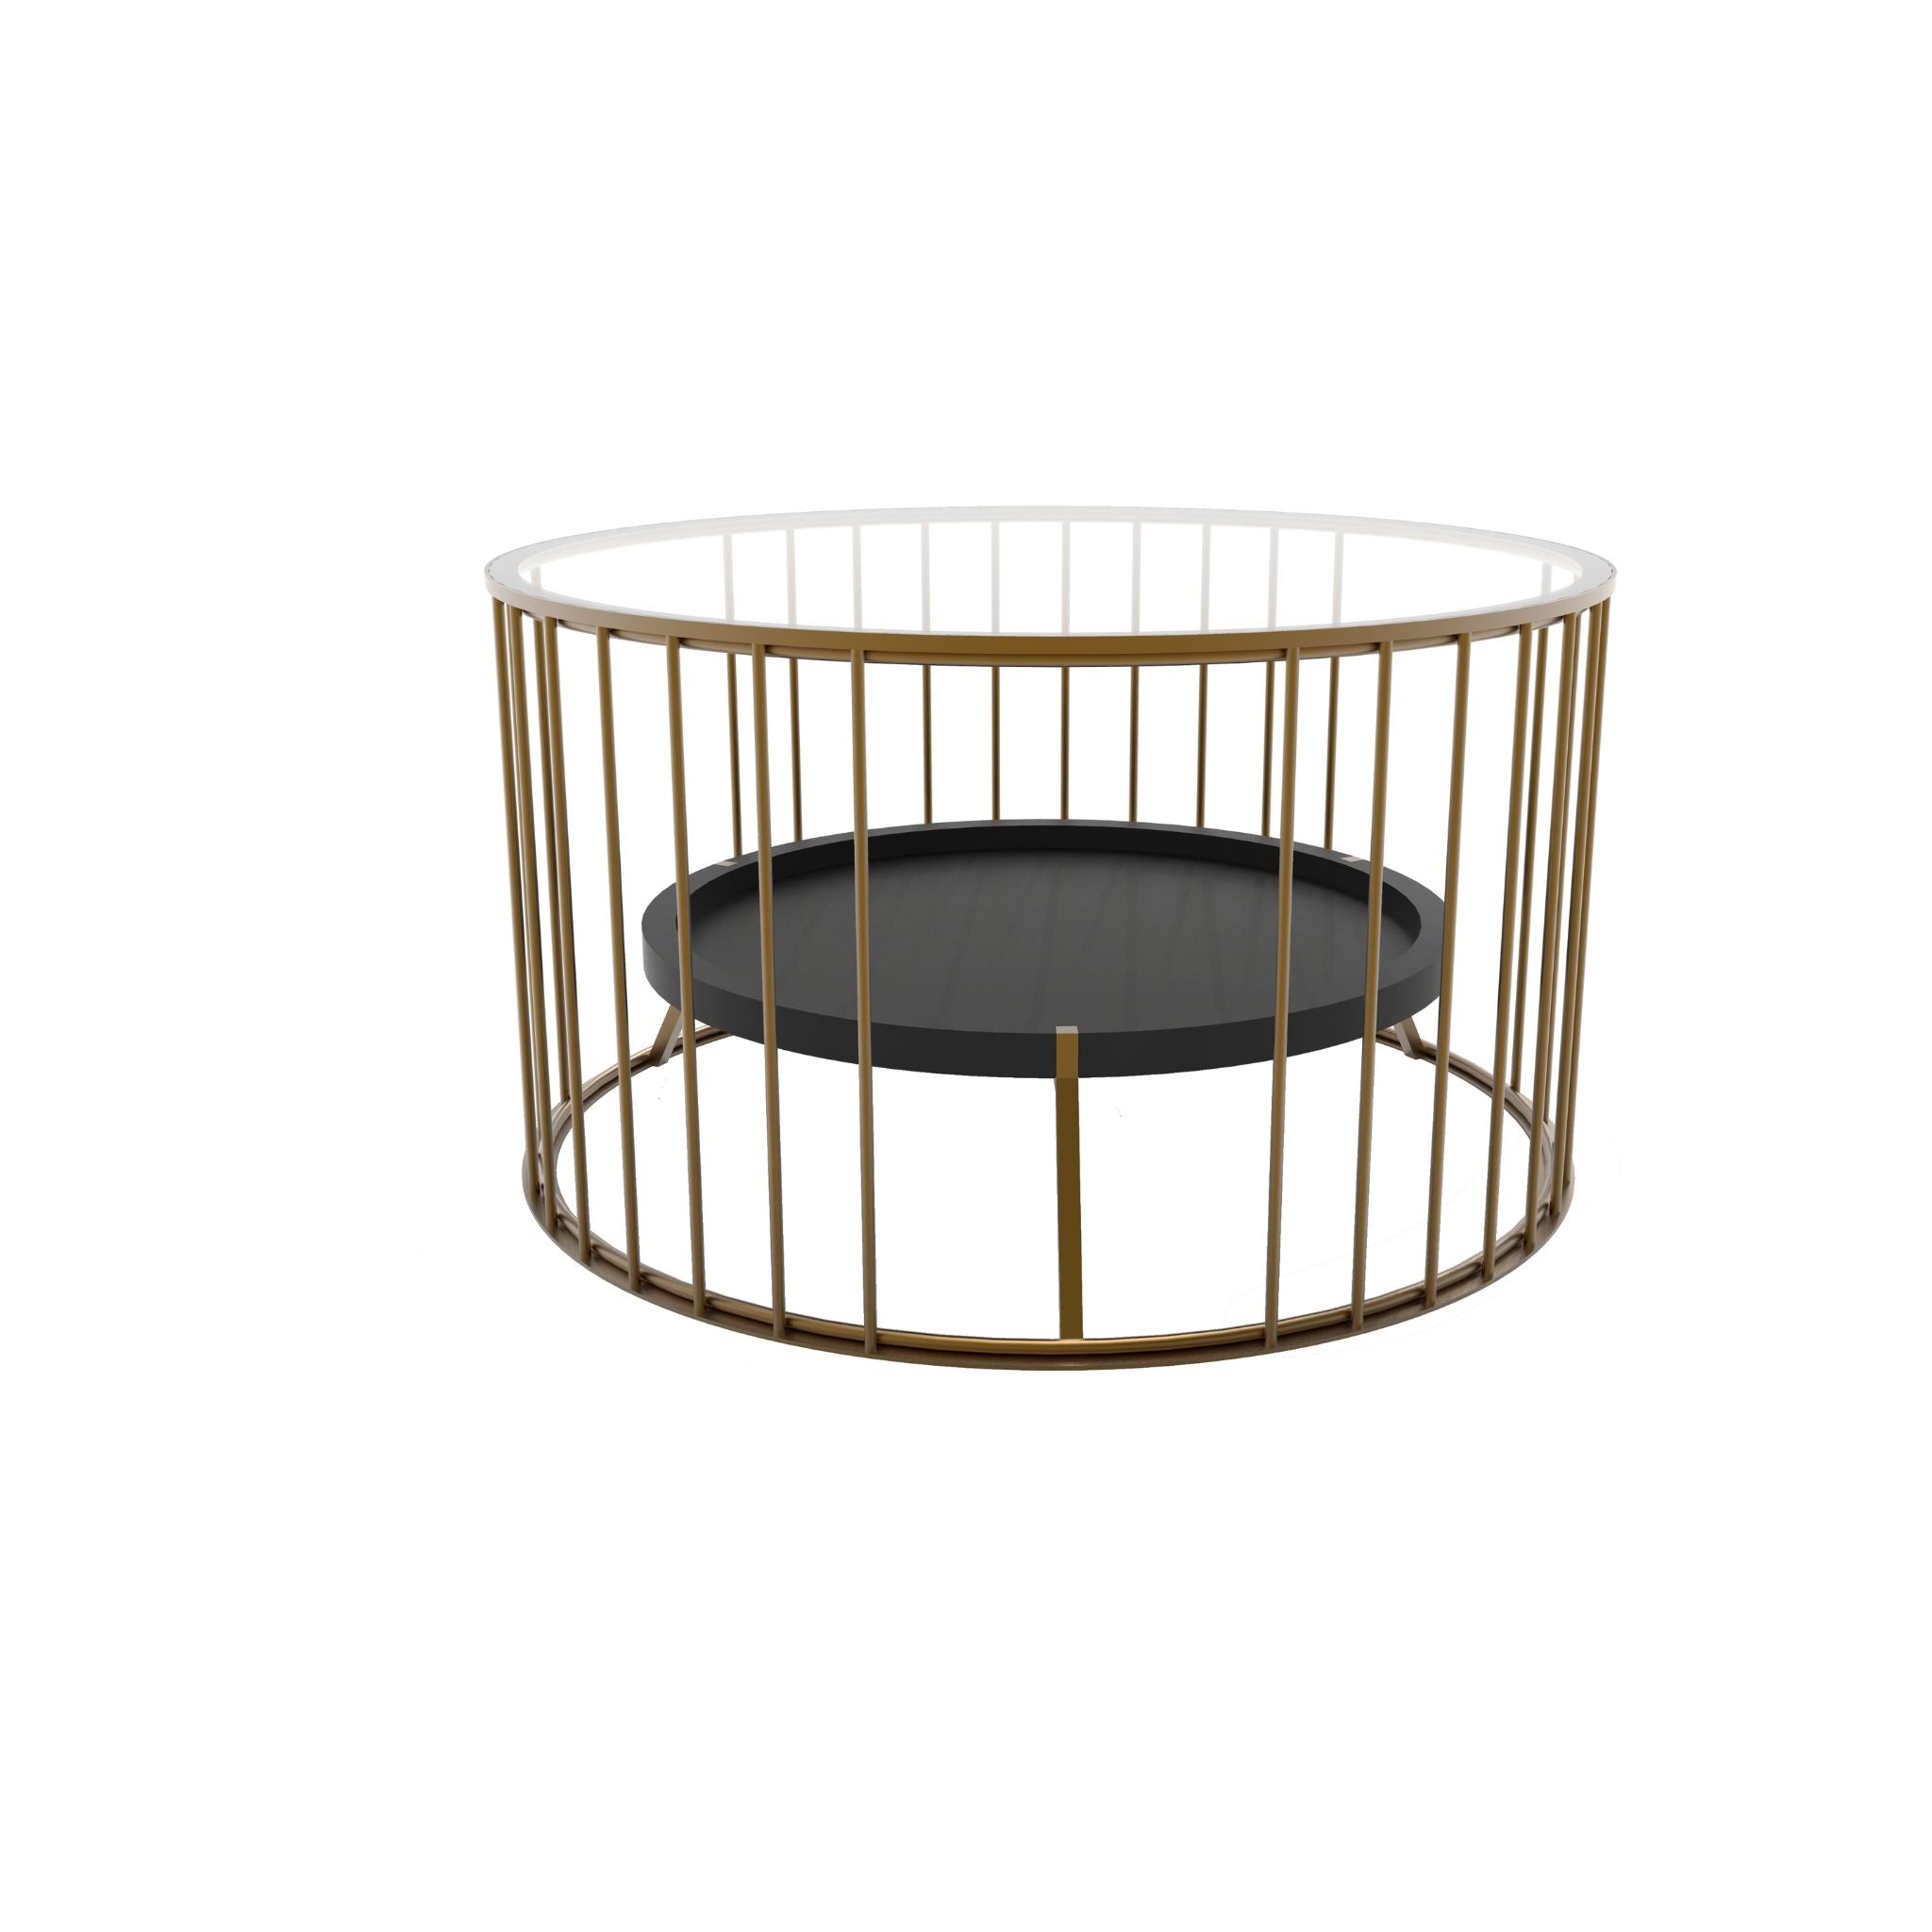 Cage brass coffee table with wooden shelf - ilbronzetto